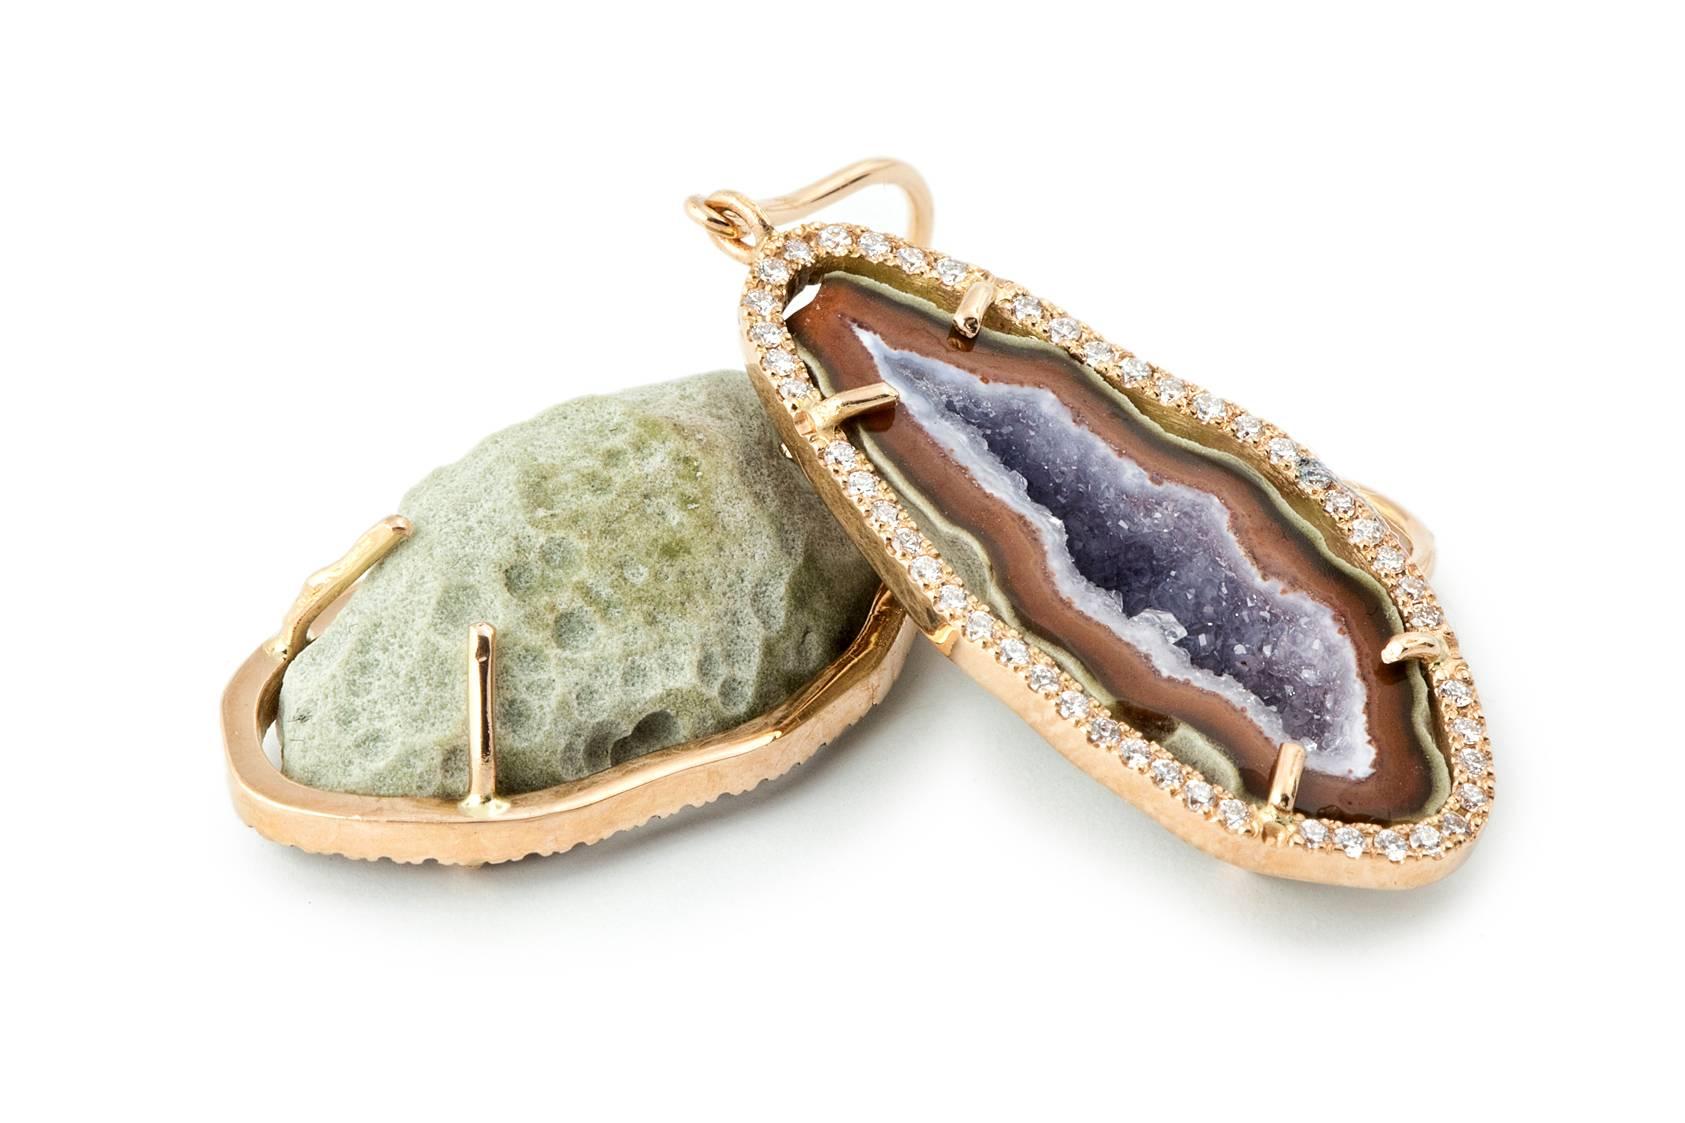 Karolin's 'Alison' earrings are handcrafted from 18 K rose gold.
The colors of this pair agate geodes remind us of a vanilla sky during sunset beach walks.
The 0.67 ct diamonds make these earrings even more precious.

Total weight of 6.8 gram.
